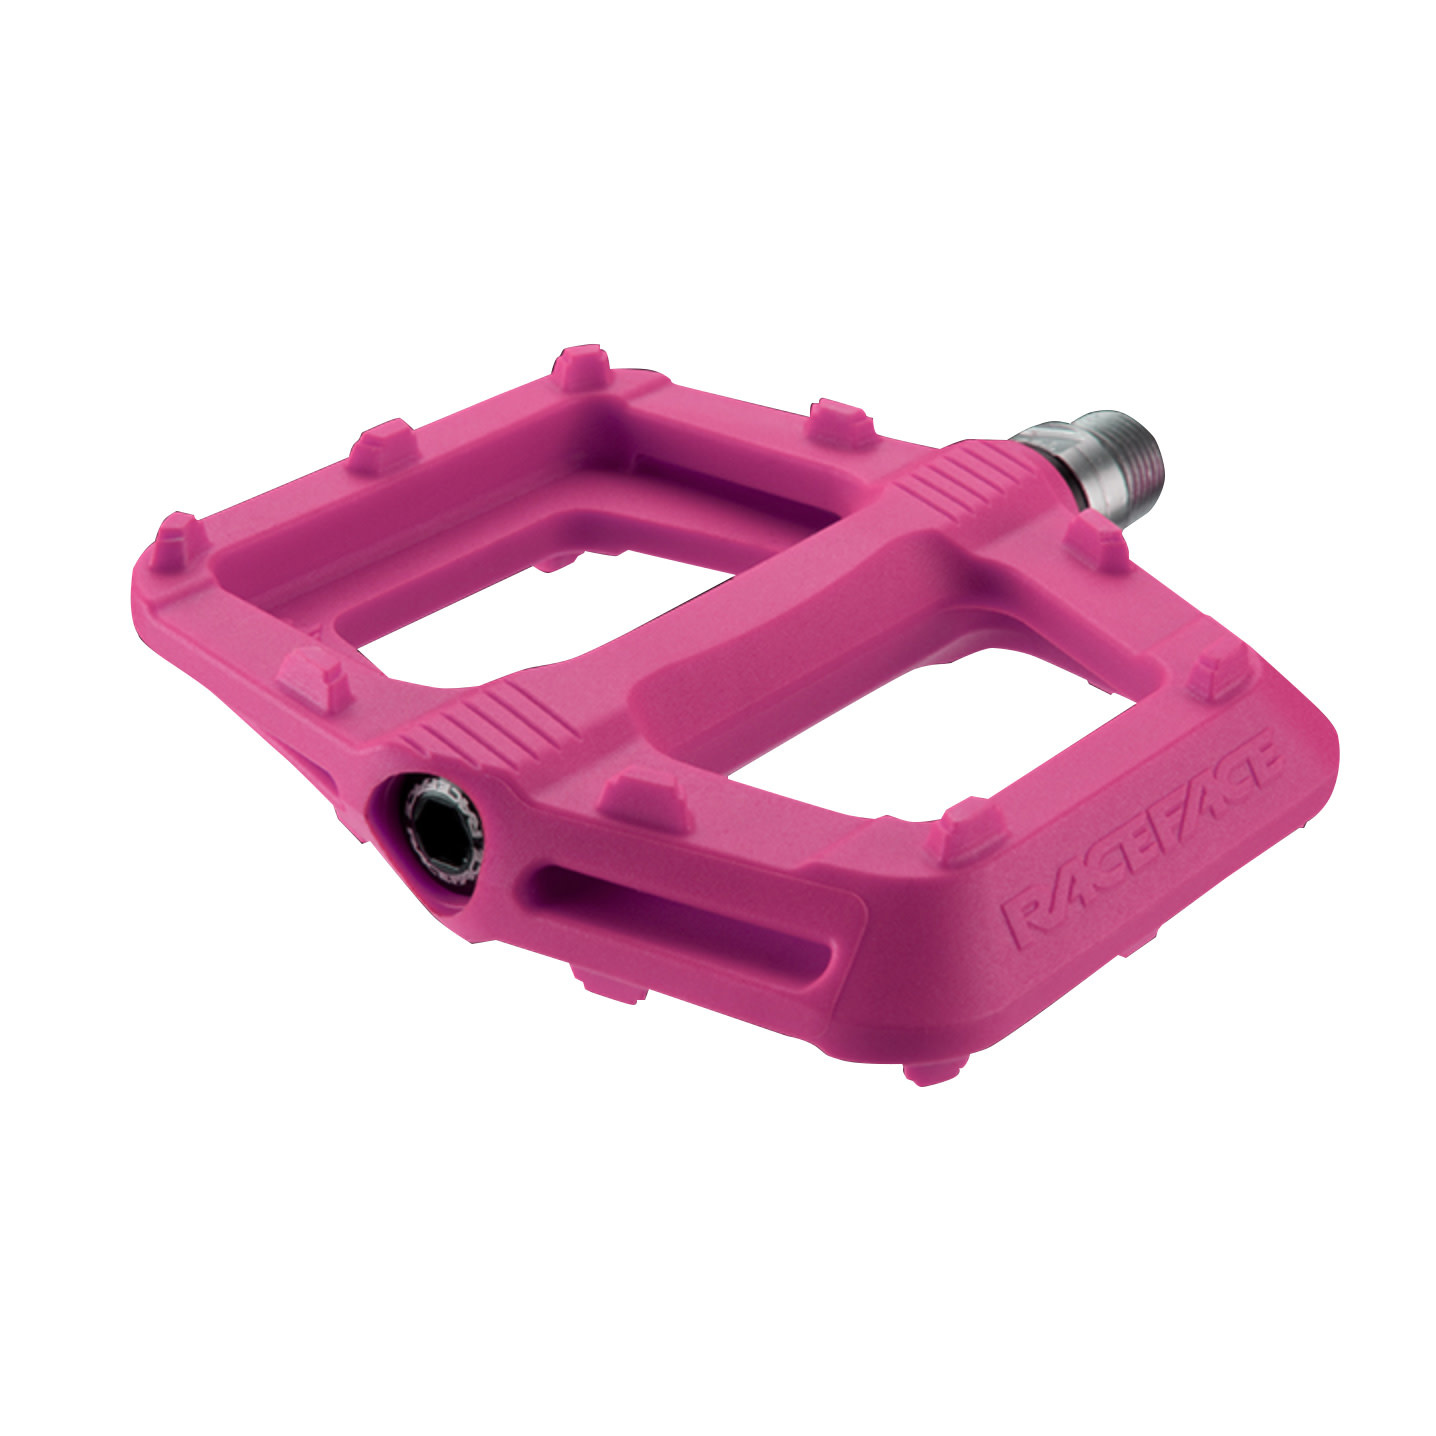 Race Face Race Face, Ride, Platform Pedals, Body: Nylon, Spindle: Cr-Mo, 9/16'', Pink, Pair